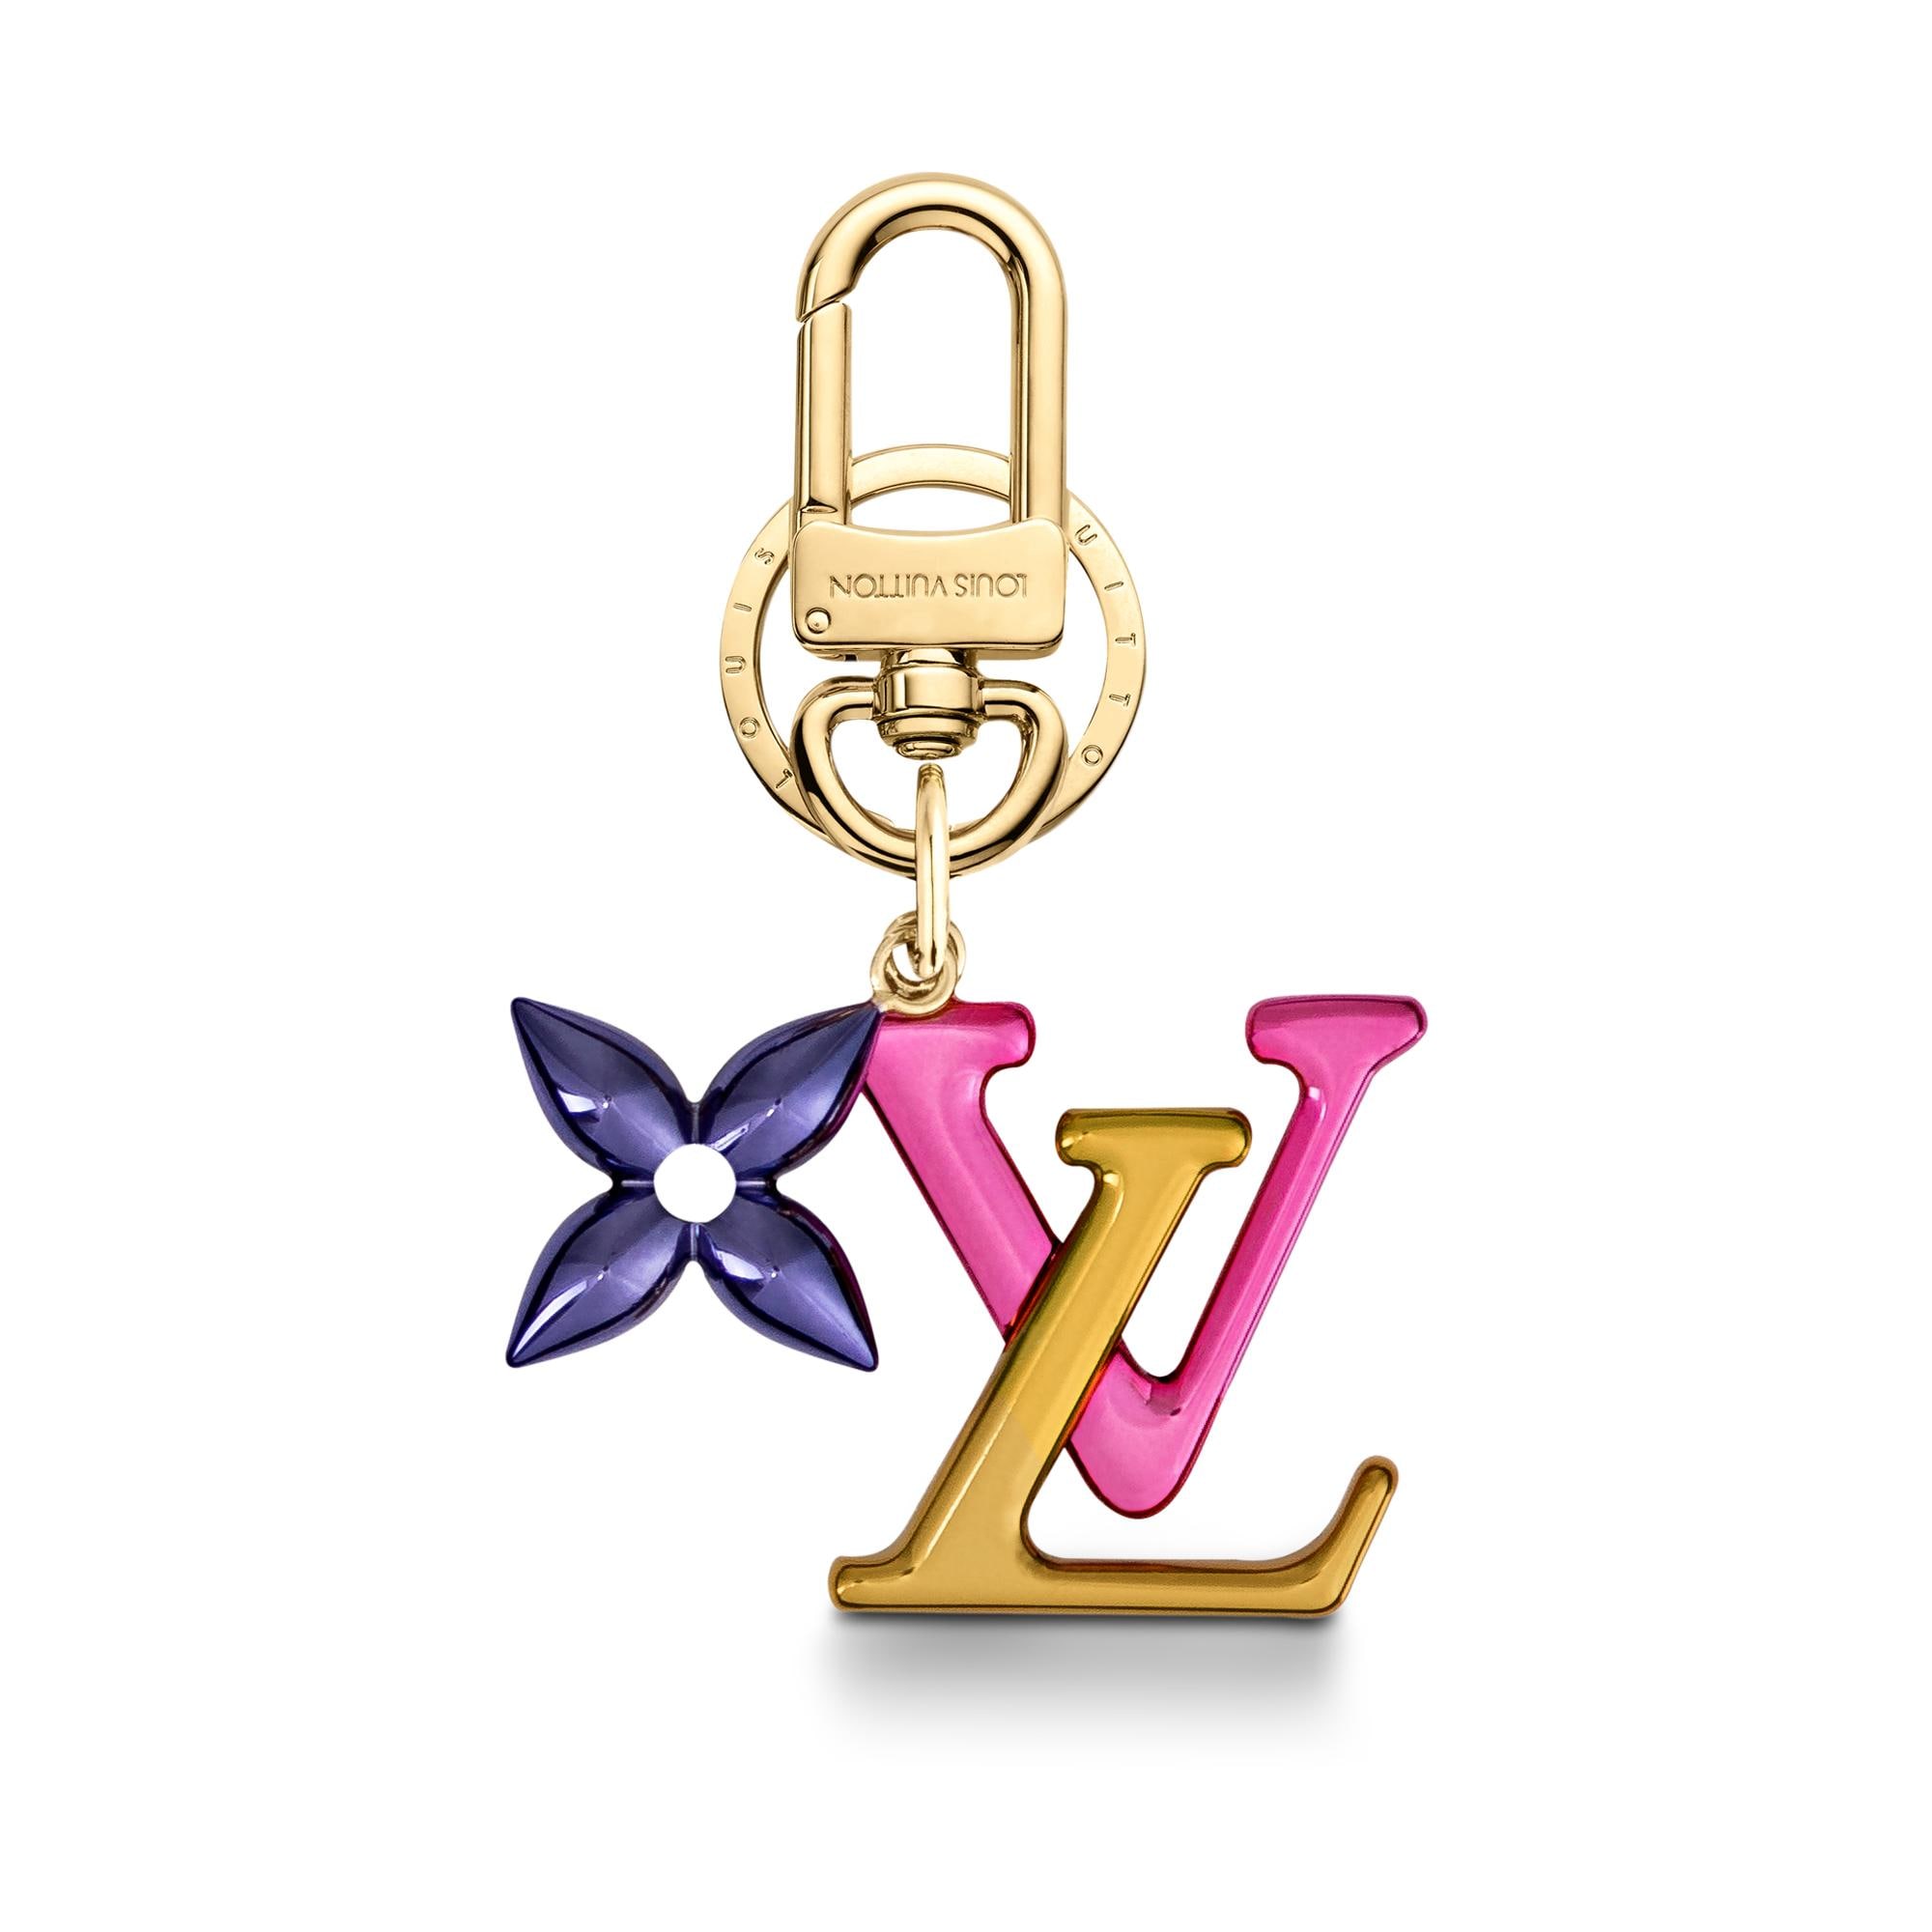 Louis Vuitton New Wave Bag Charm and Key Holder in Gold – Accessories M67808